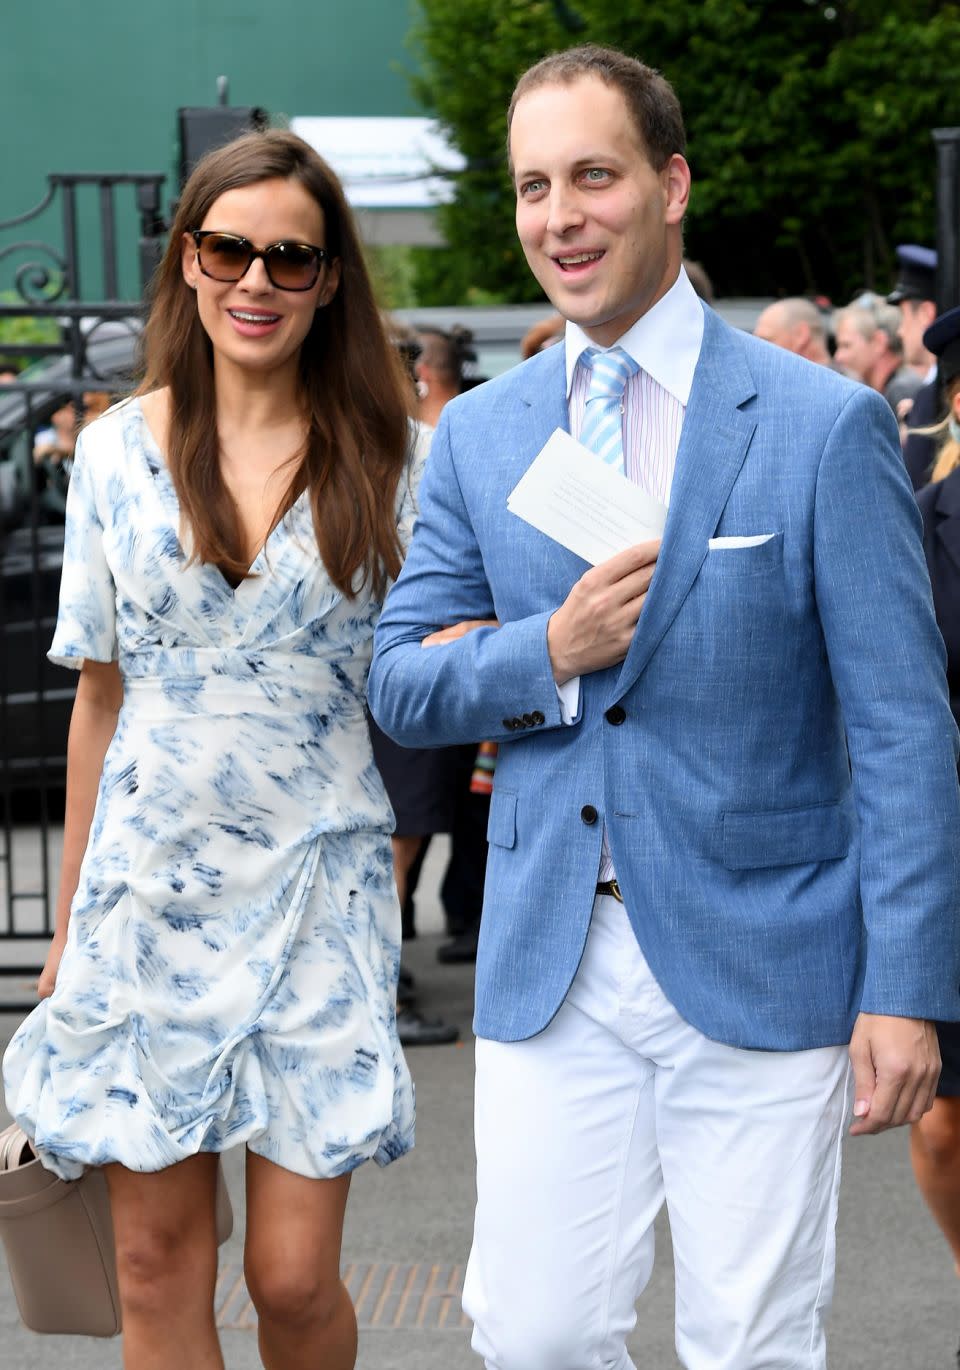 Maud Windsor is also attending Thomas's Battersea joining her distant cousin Prince George. Here her parents Lord and Lady Windsor are pictured at Wimbledon this year. Source: Getty